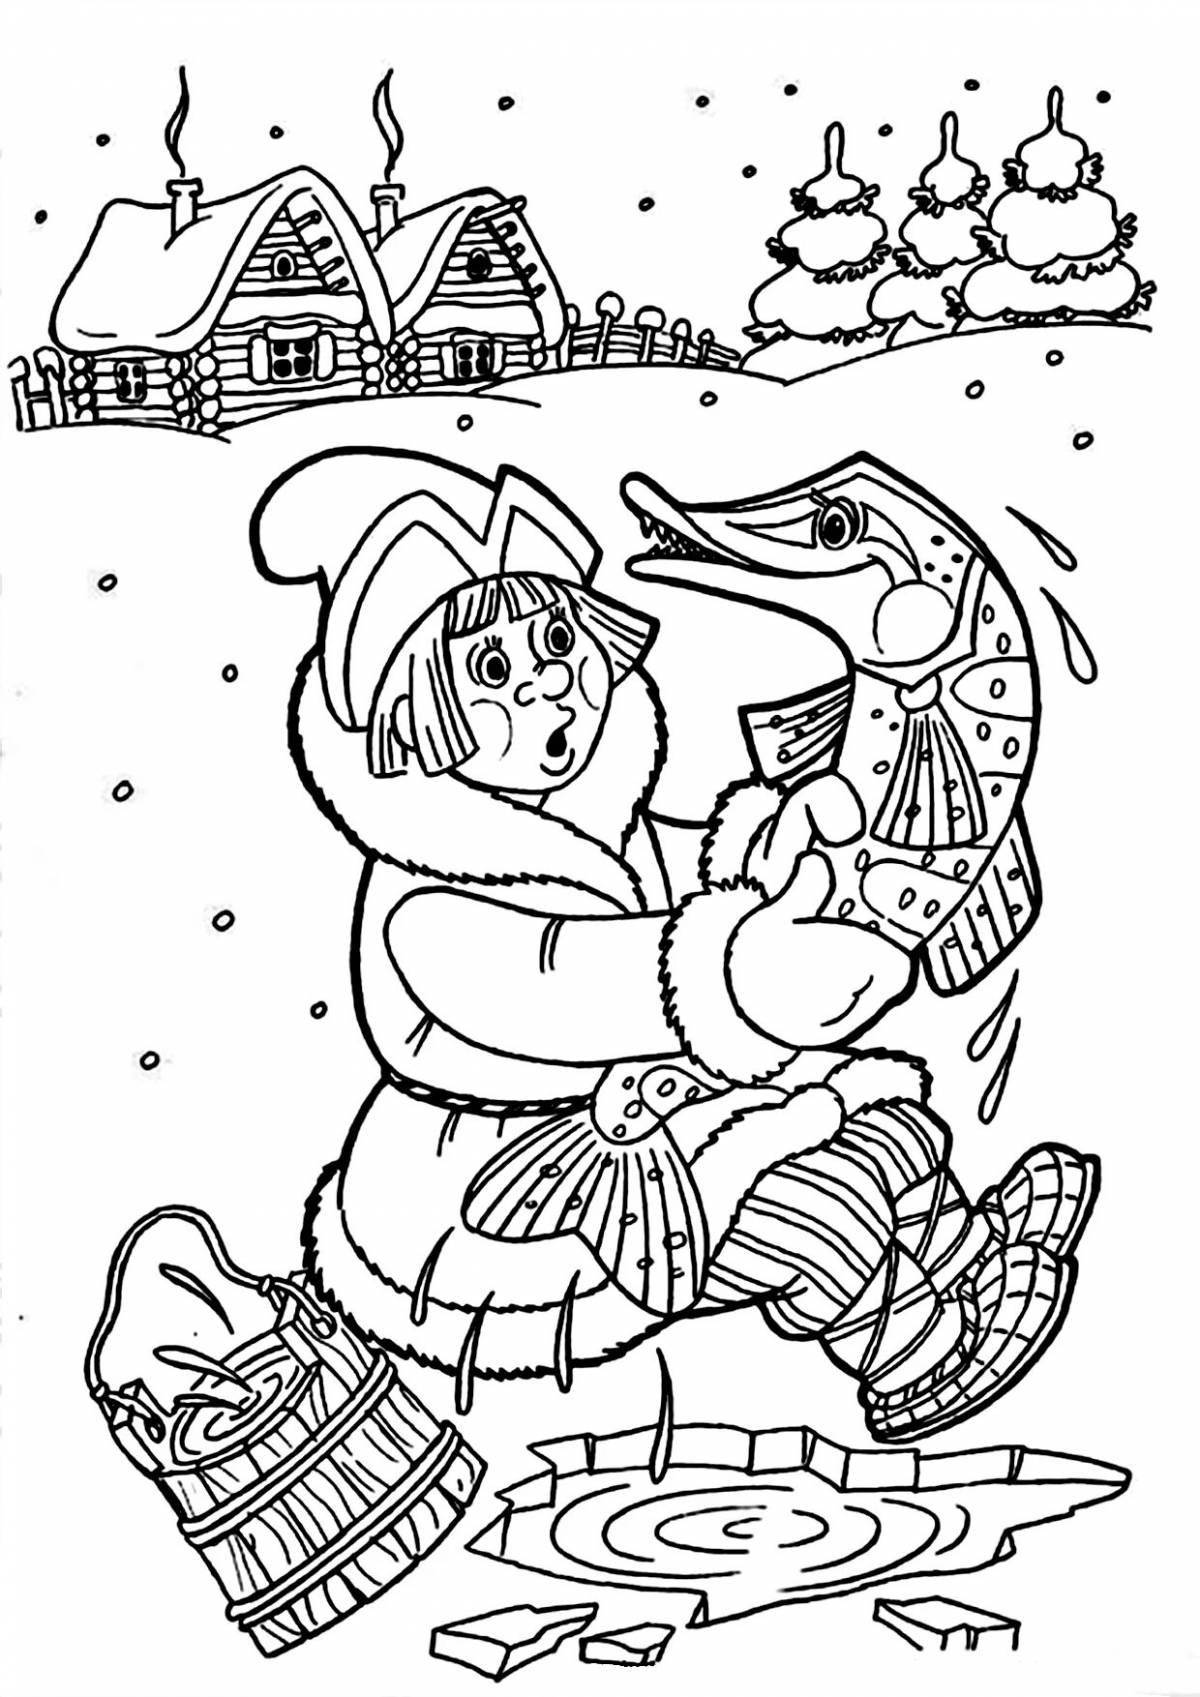 Coloring page wild Russian folk tales